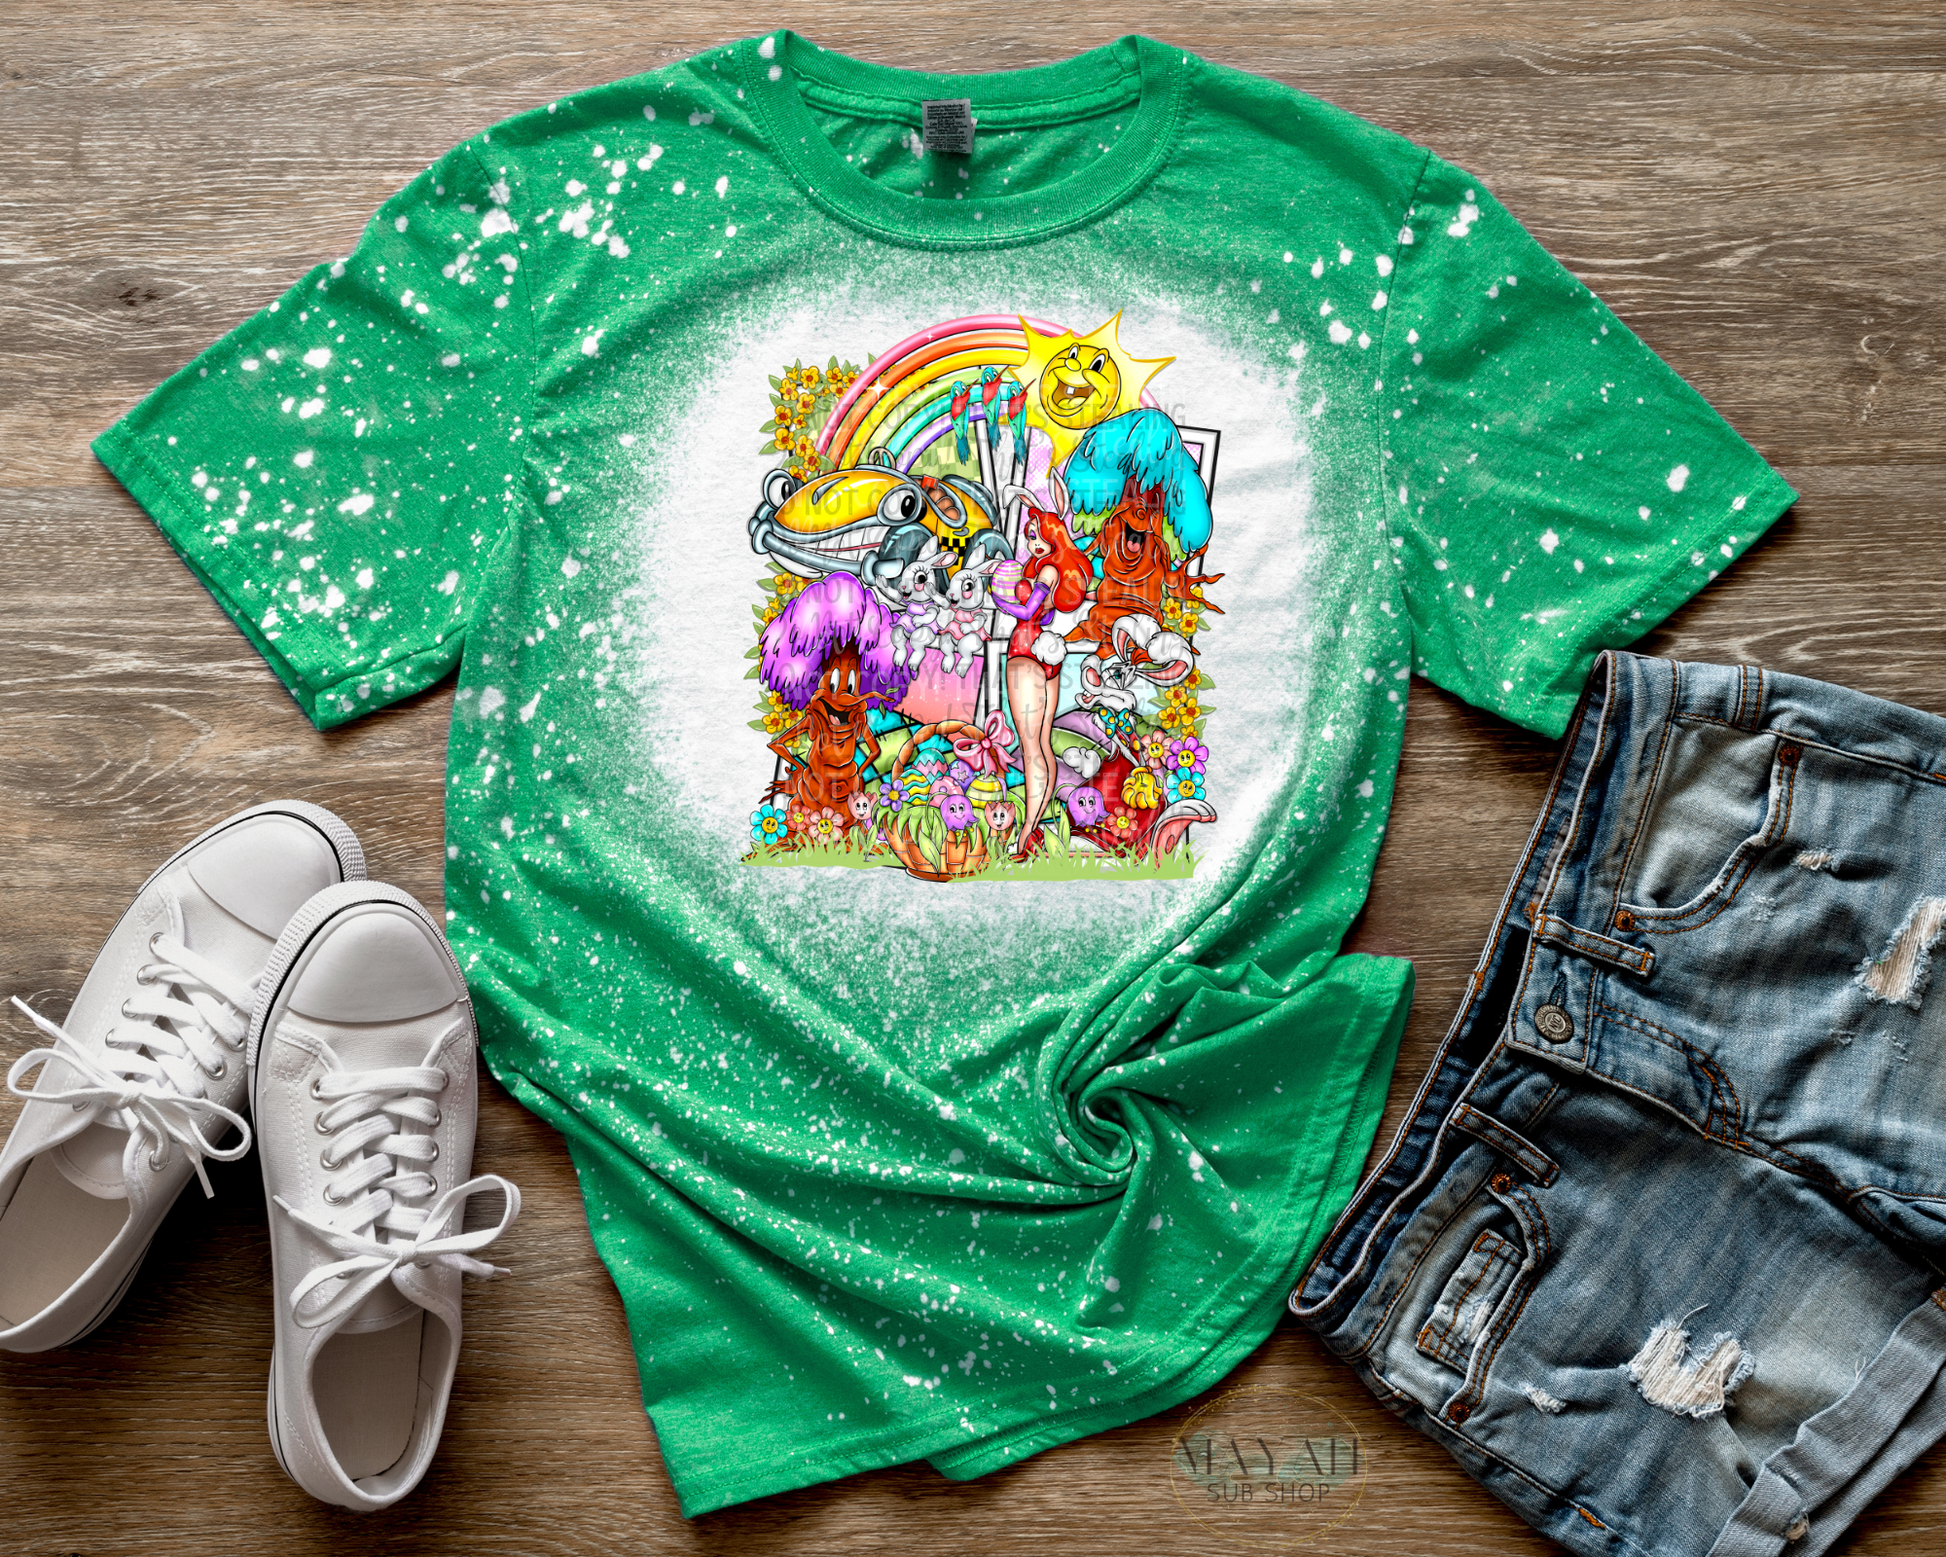 Easter Toon Bleached Tee - Mayan Sub Shop